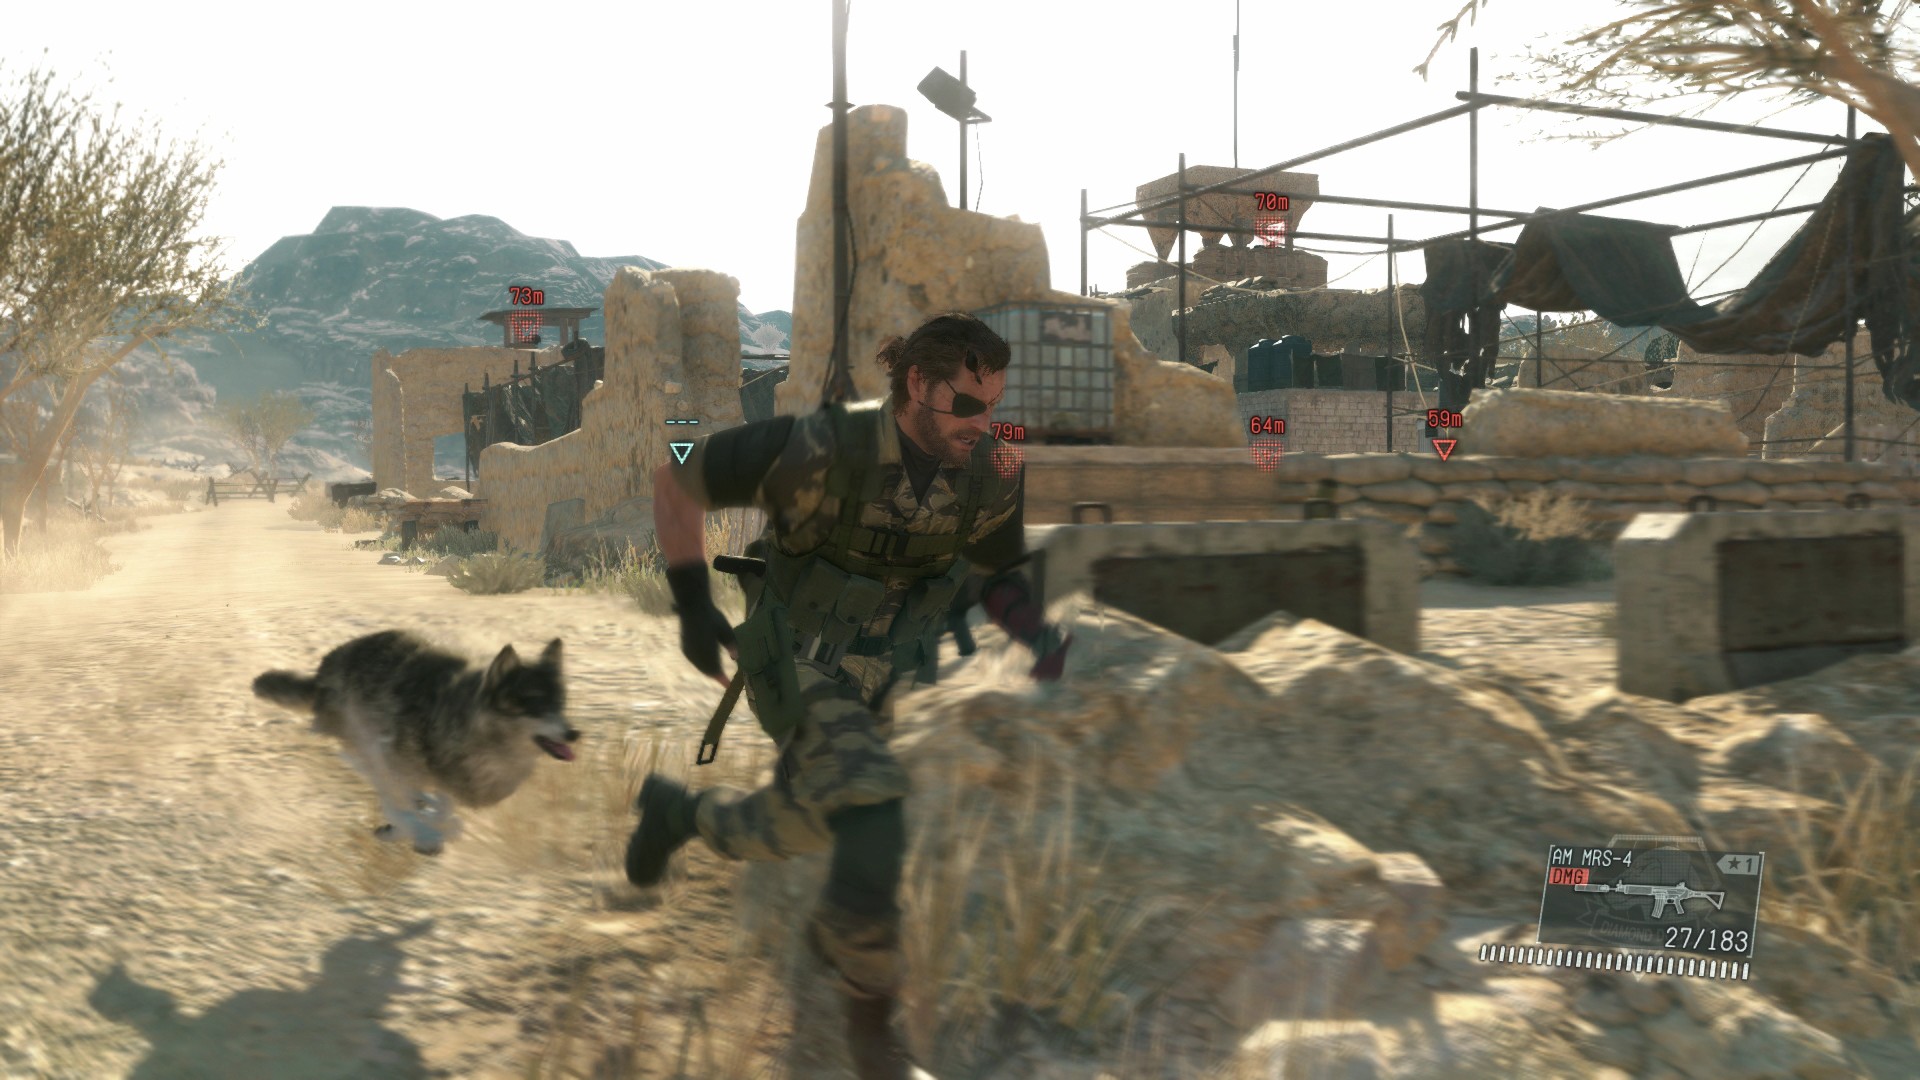 METAL GEAR SOLID V: The Definitive Experience (KEY)